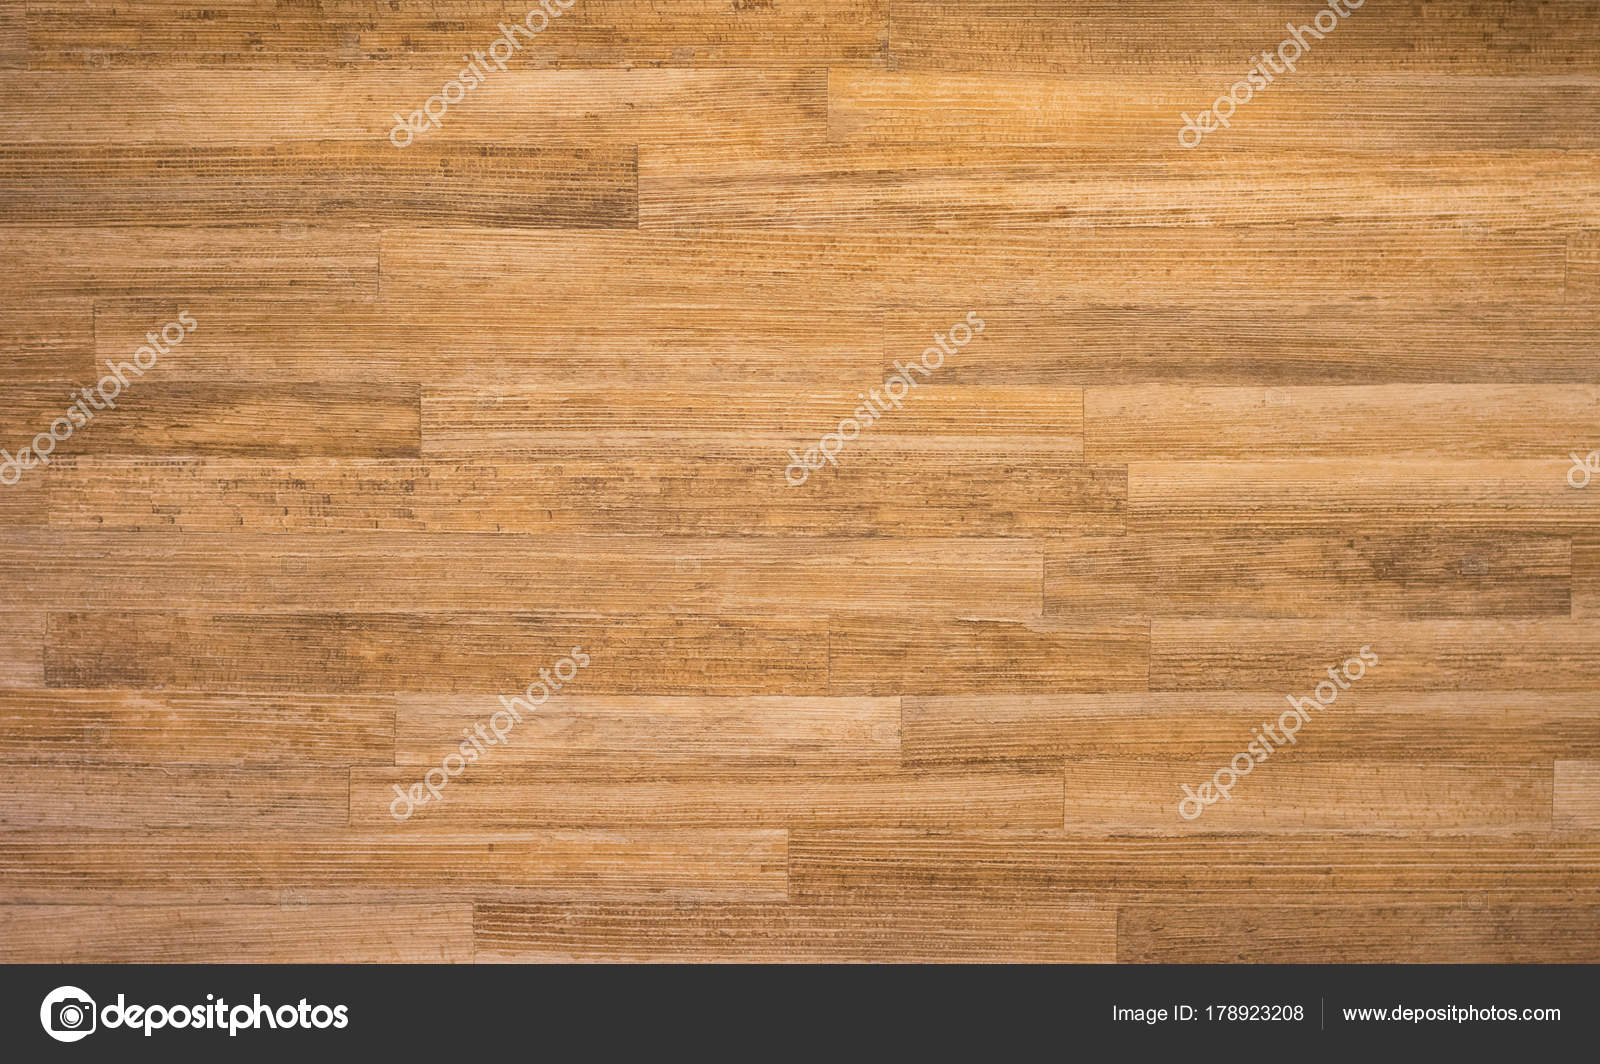 Wooden Desk Texture Brown Wood Material And Surface Nature